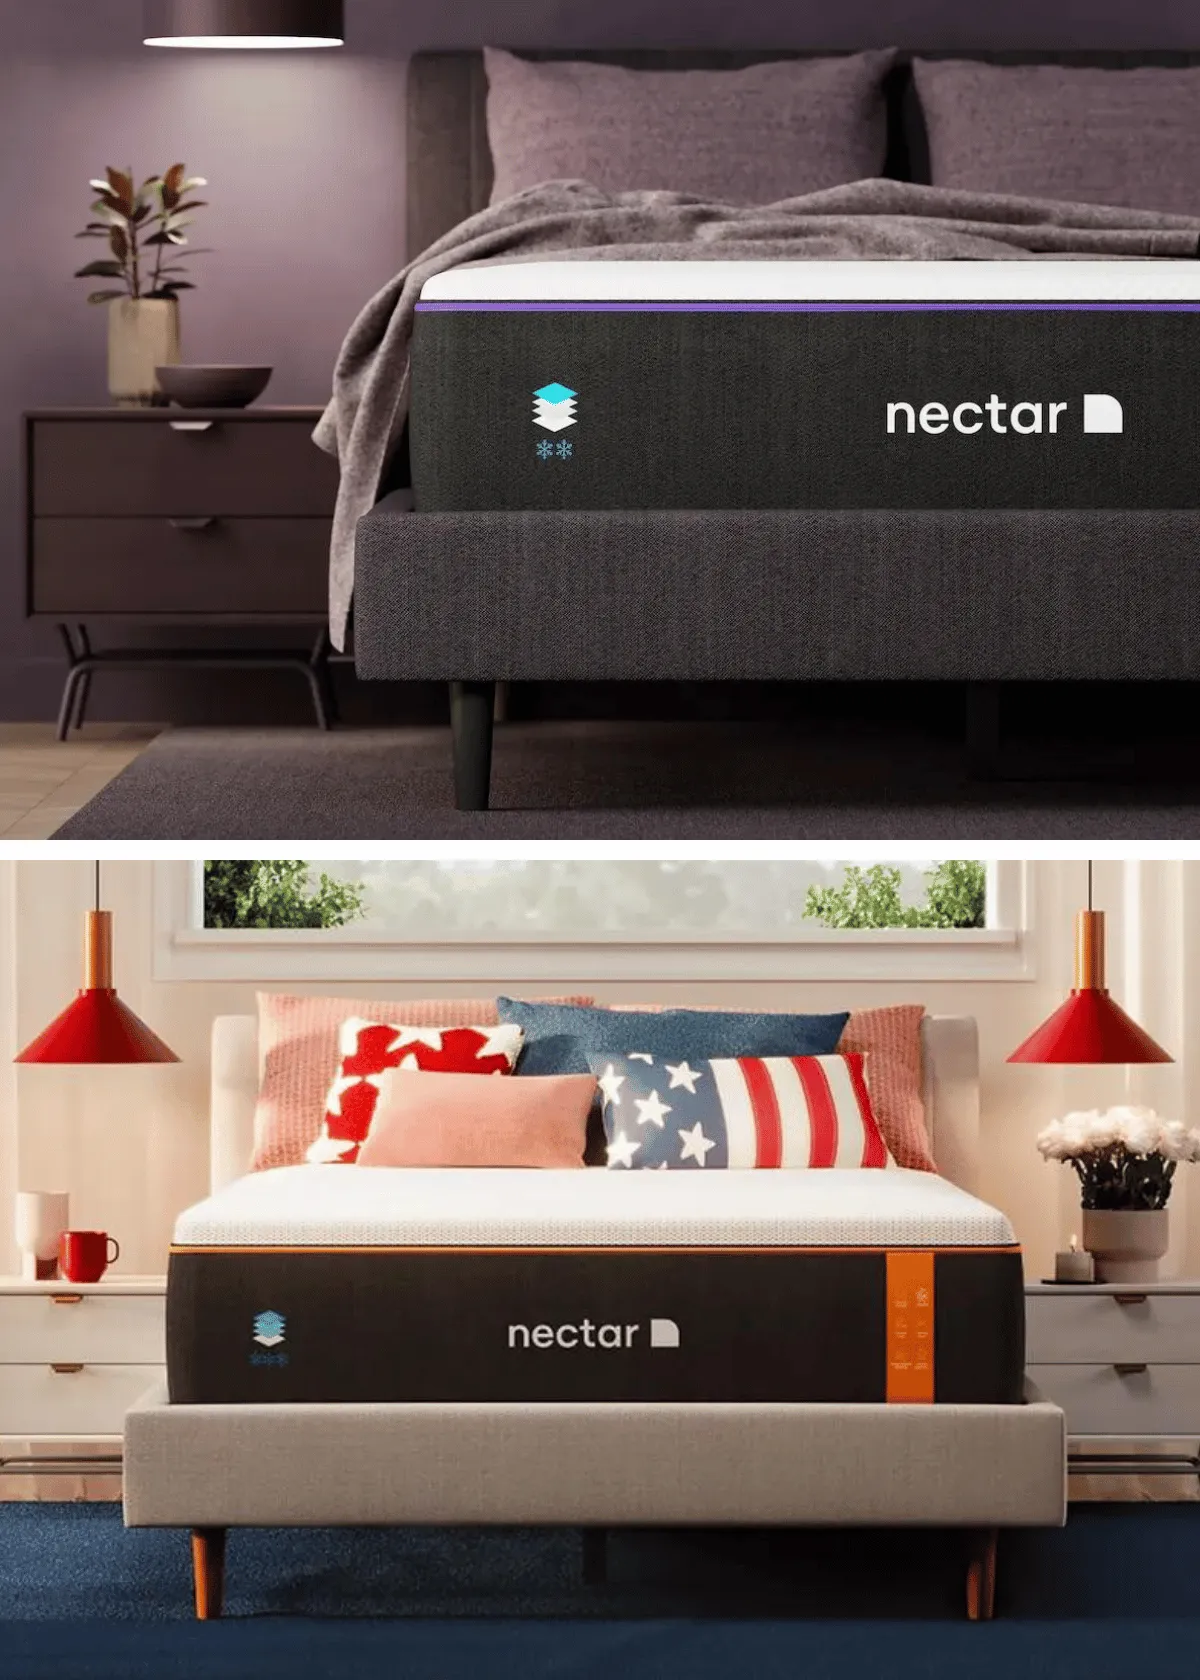 "Is the Nectar Twin Mattress Better for Teens or Single Adults?"